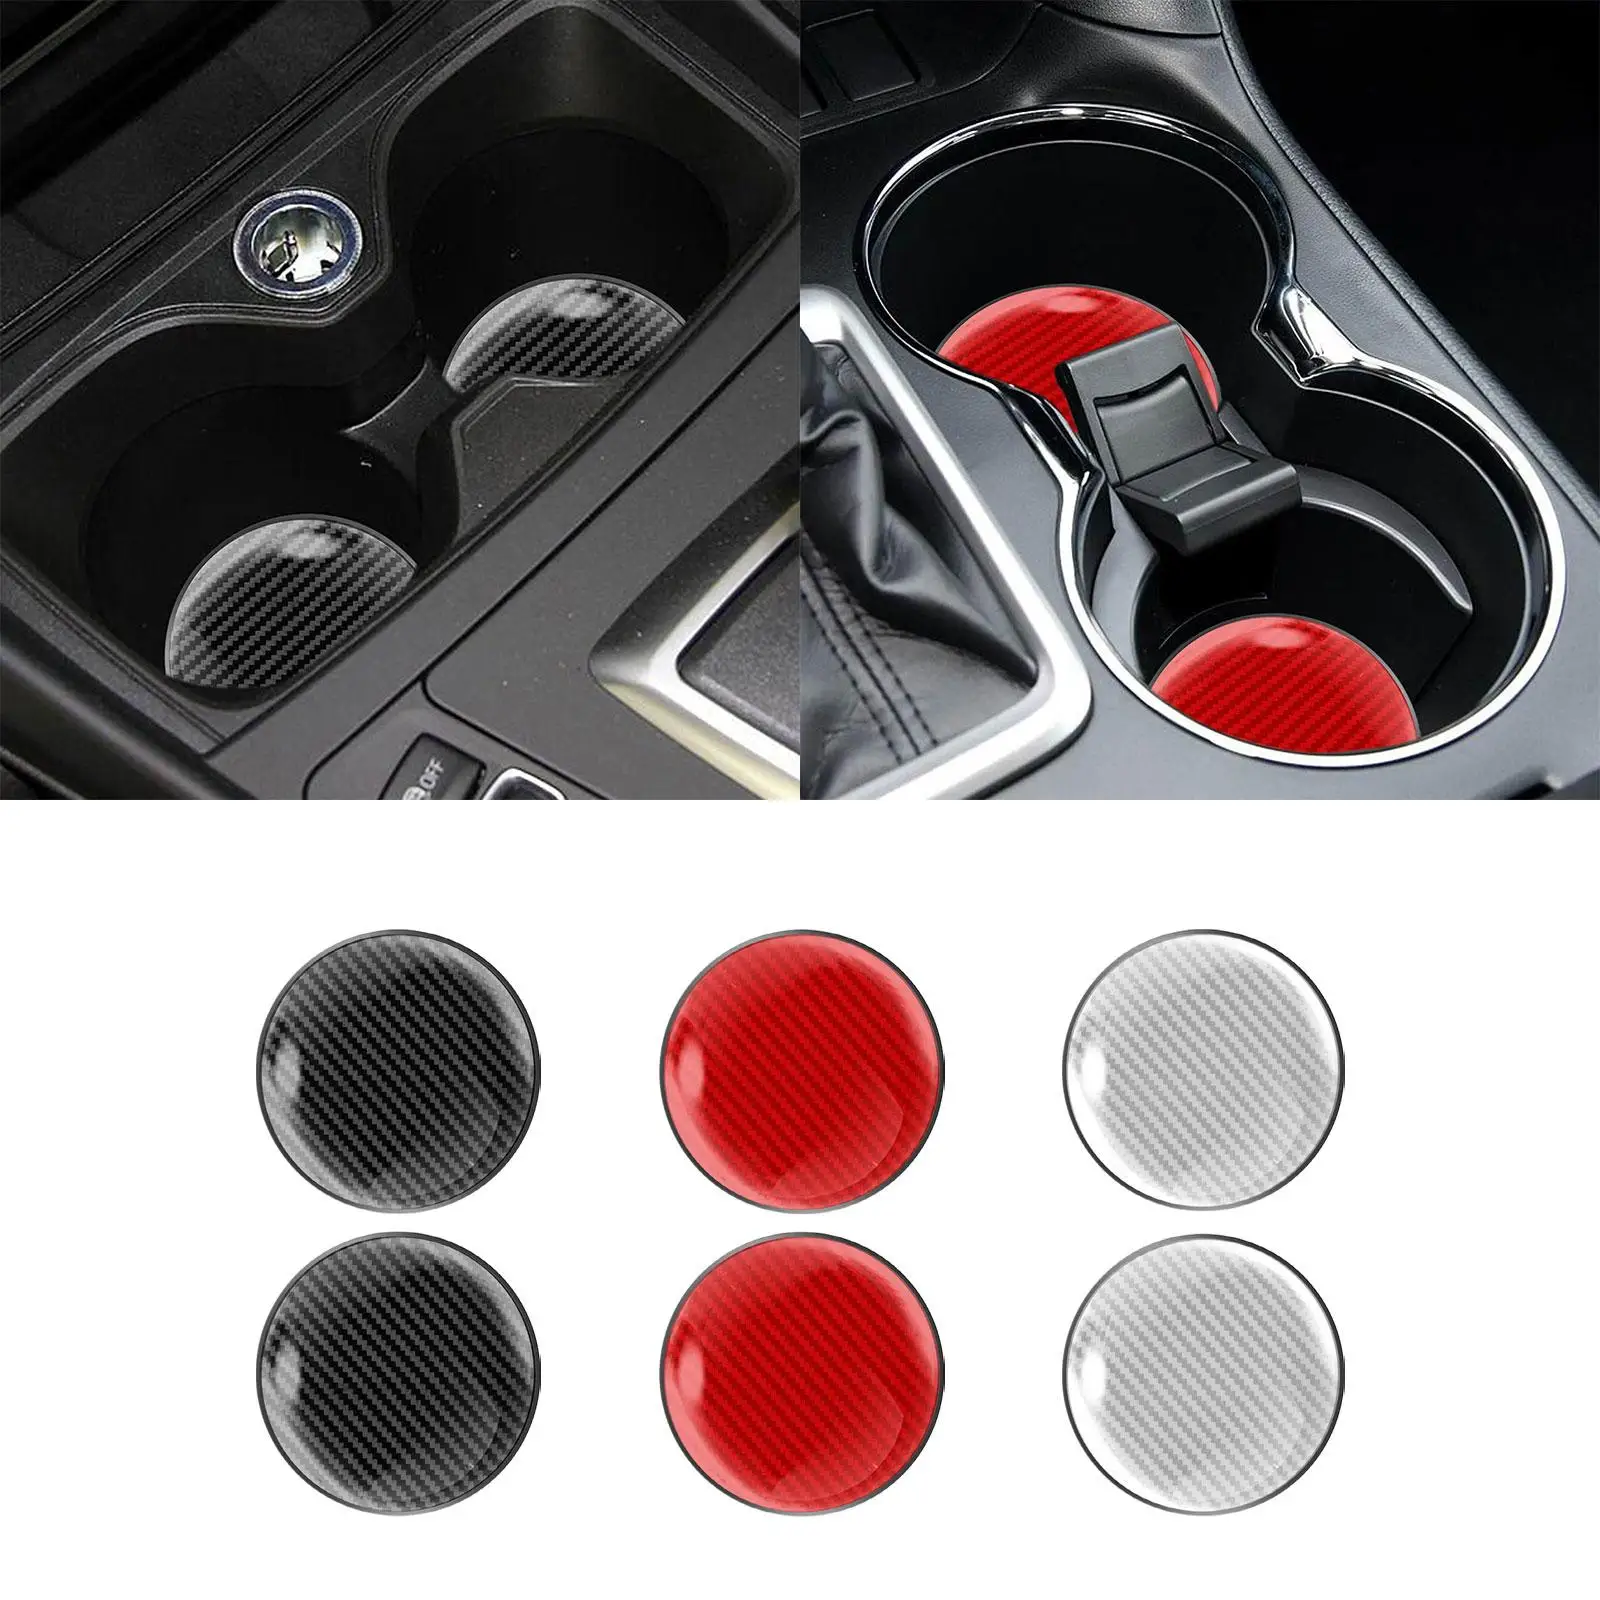 2x Cup Holder Coaster Car Accessory Non Slip Teacup Protector Water Cup Coasters Slot Vehicle Coasters for Outdoor Most Cars